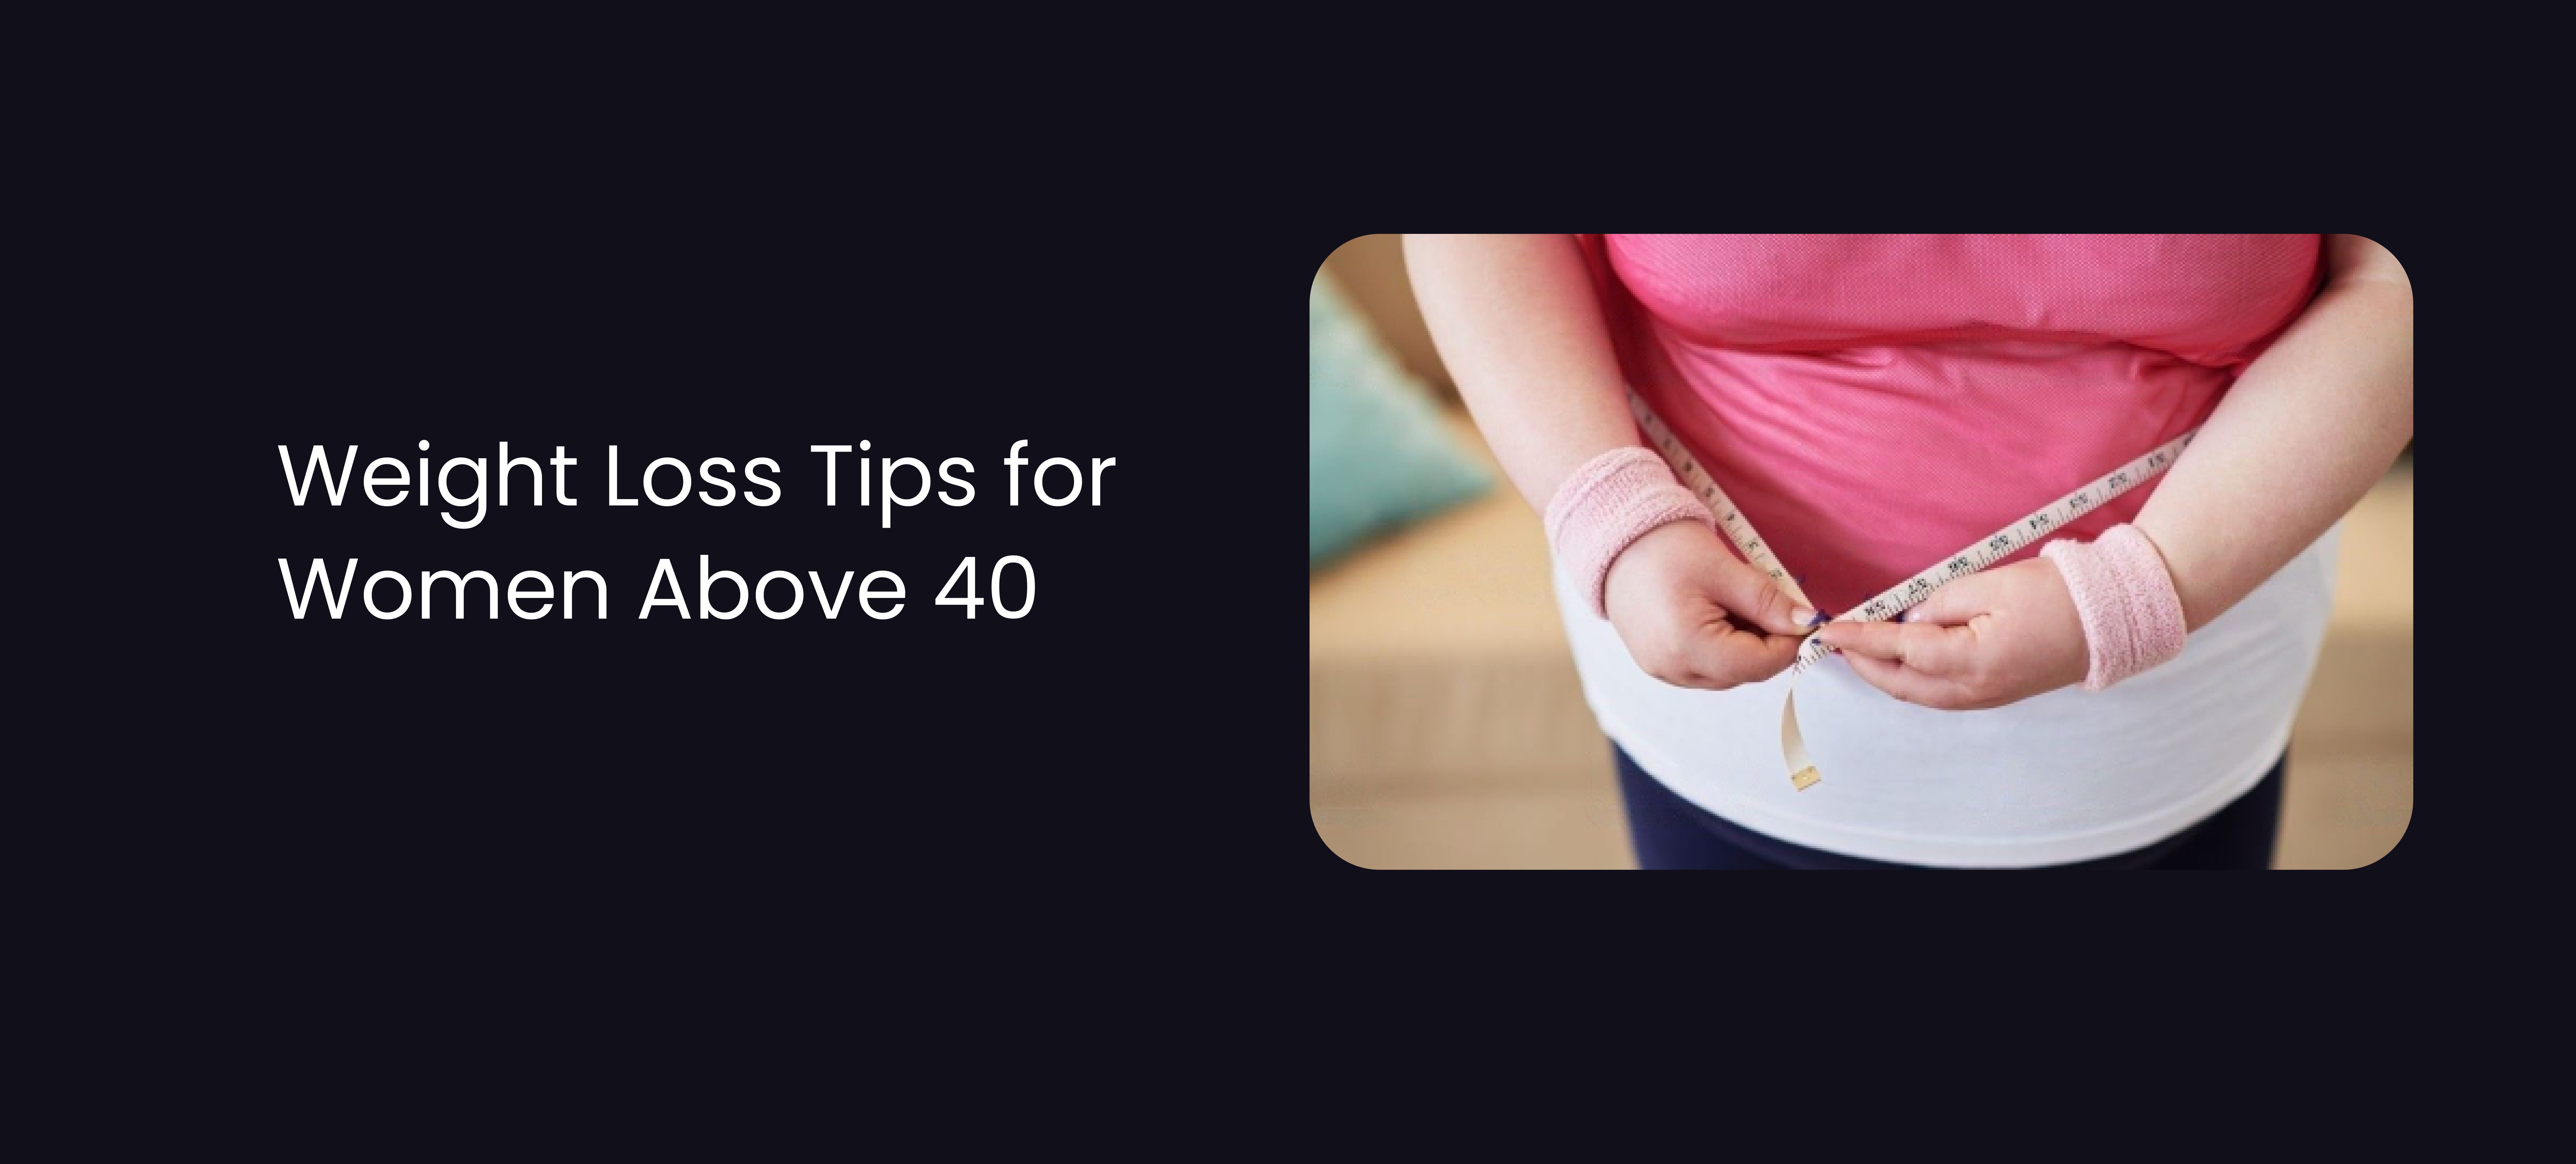 Top Weight Loss Tips for Women Above 40